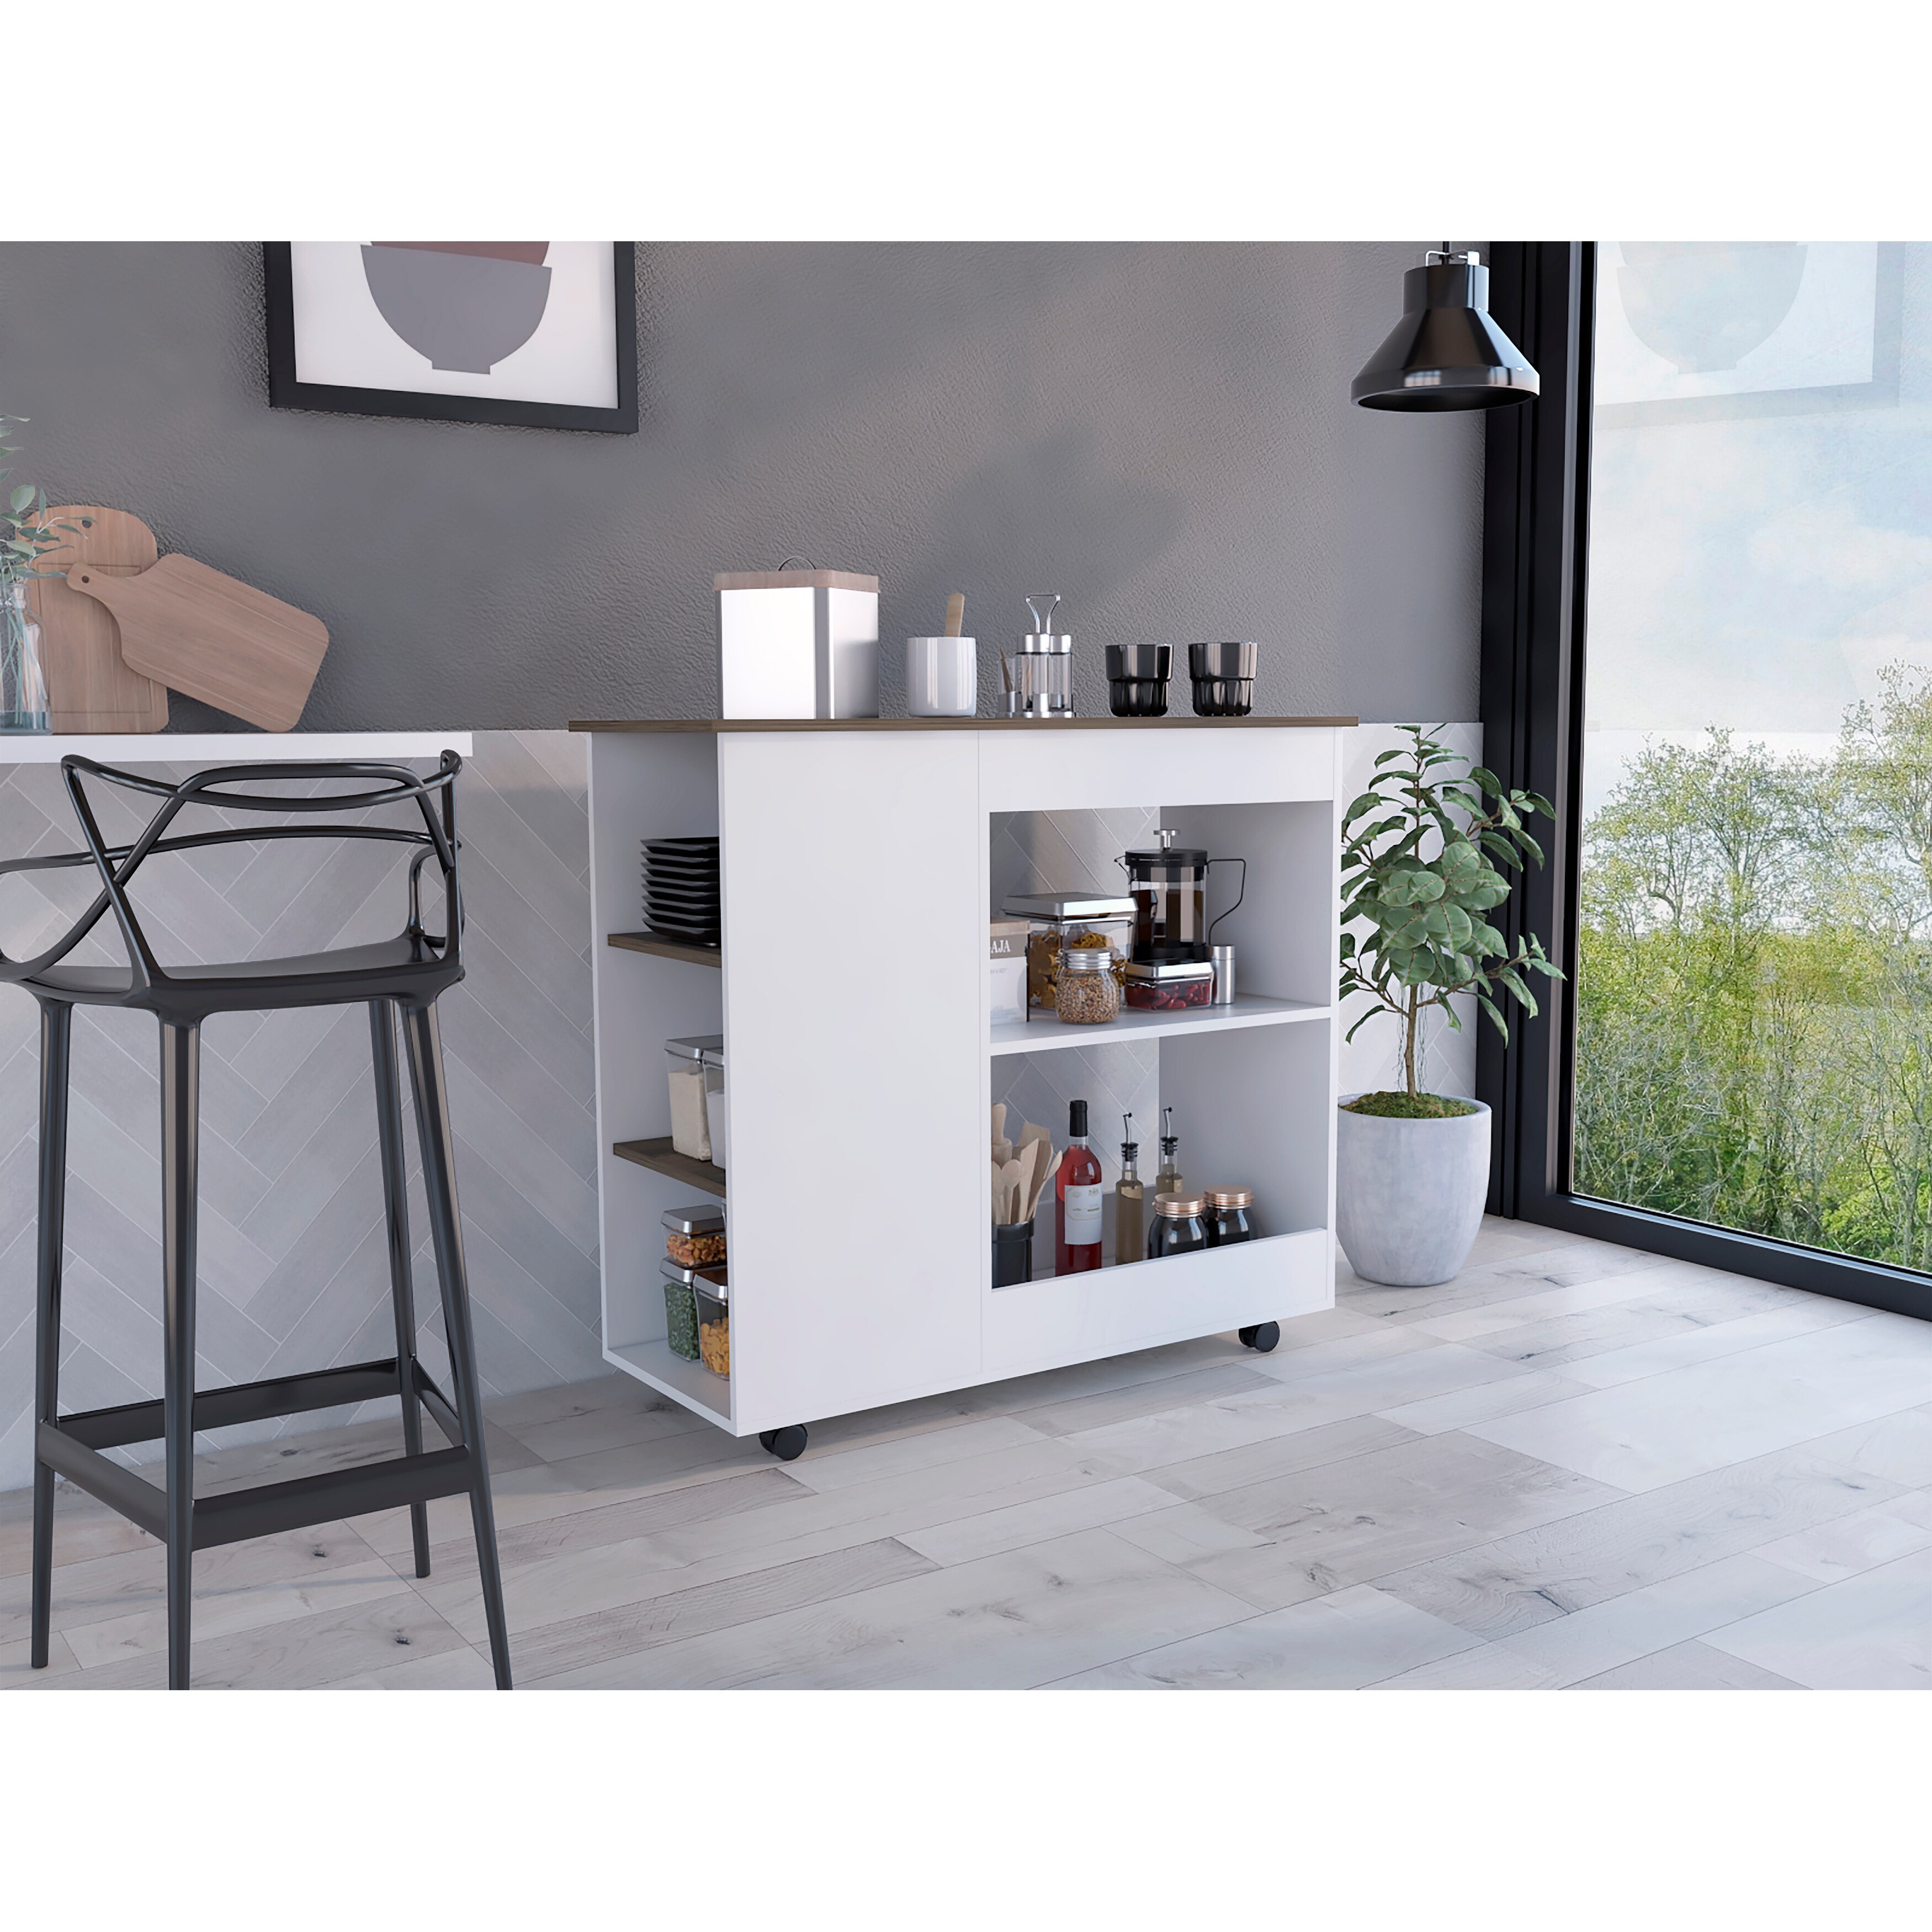 FM Furniture Arizona Kitchen Cart with 2 Storage Shelves, 3 Side Shelves, and 4 Casters